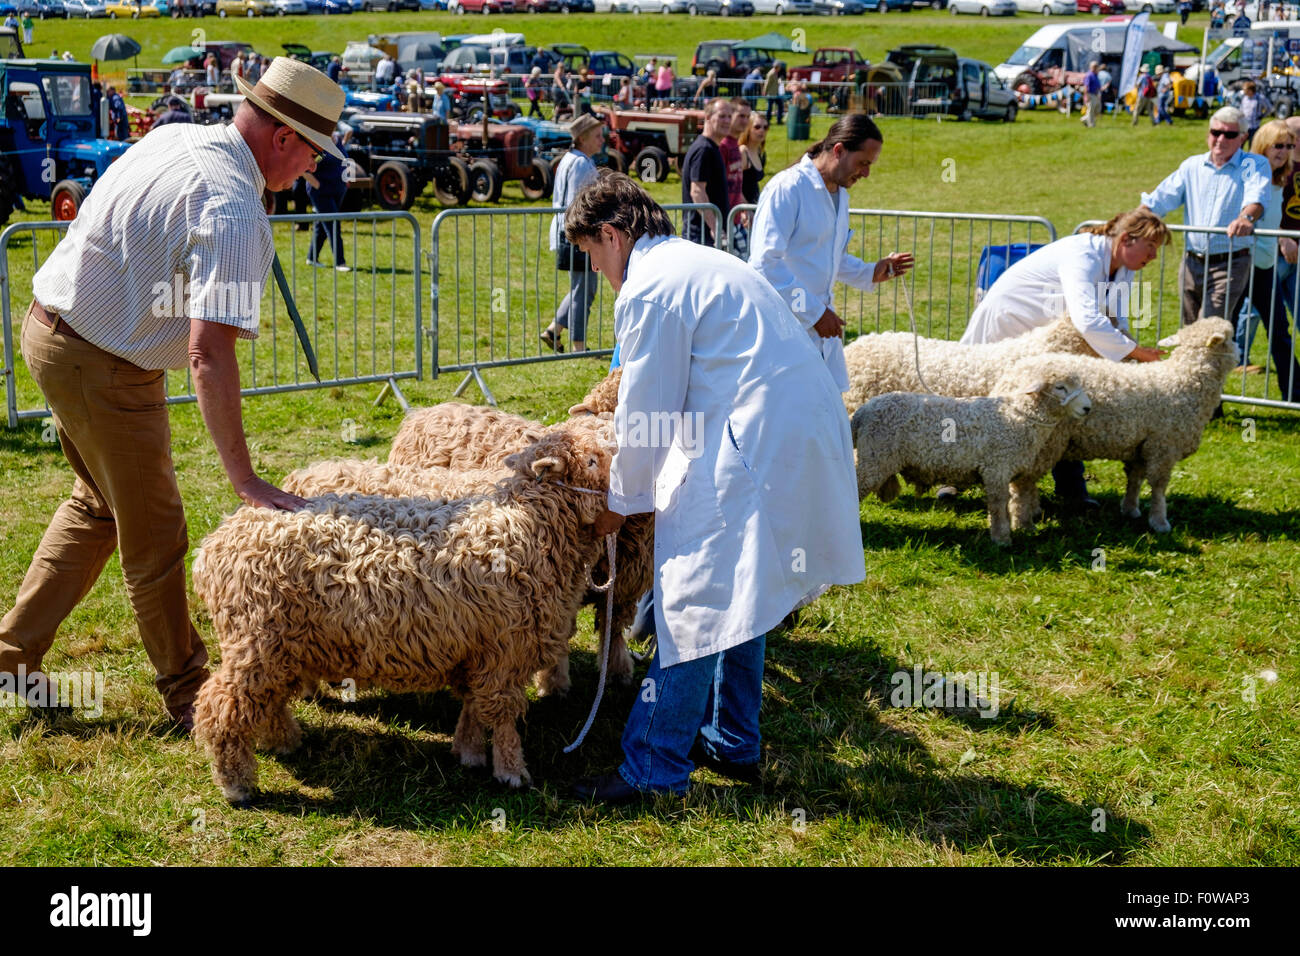 Judging of sheep at Chepstow Agricultural Show Wales UK. Handlers / owners in white coats, Judge in straw hat. Stock Photo